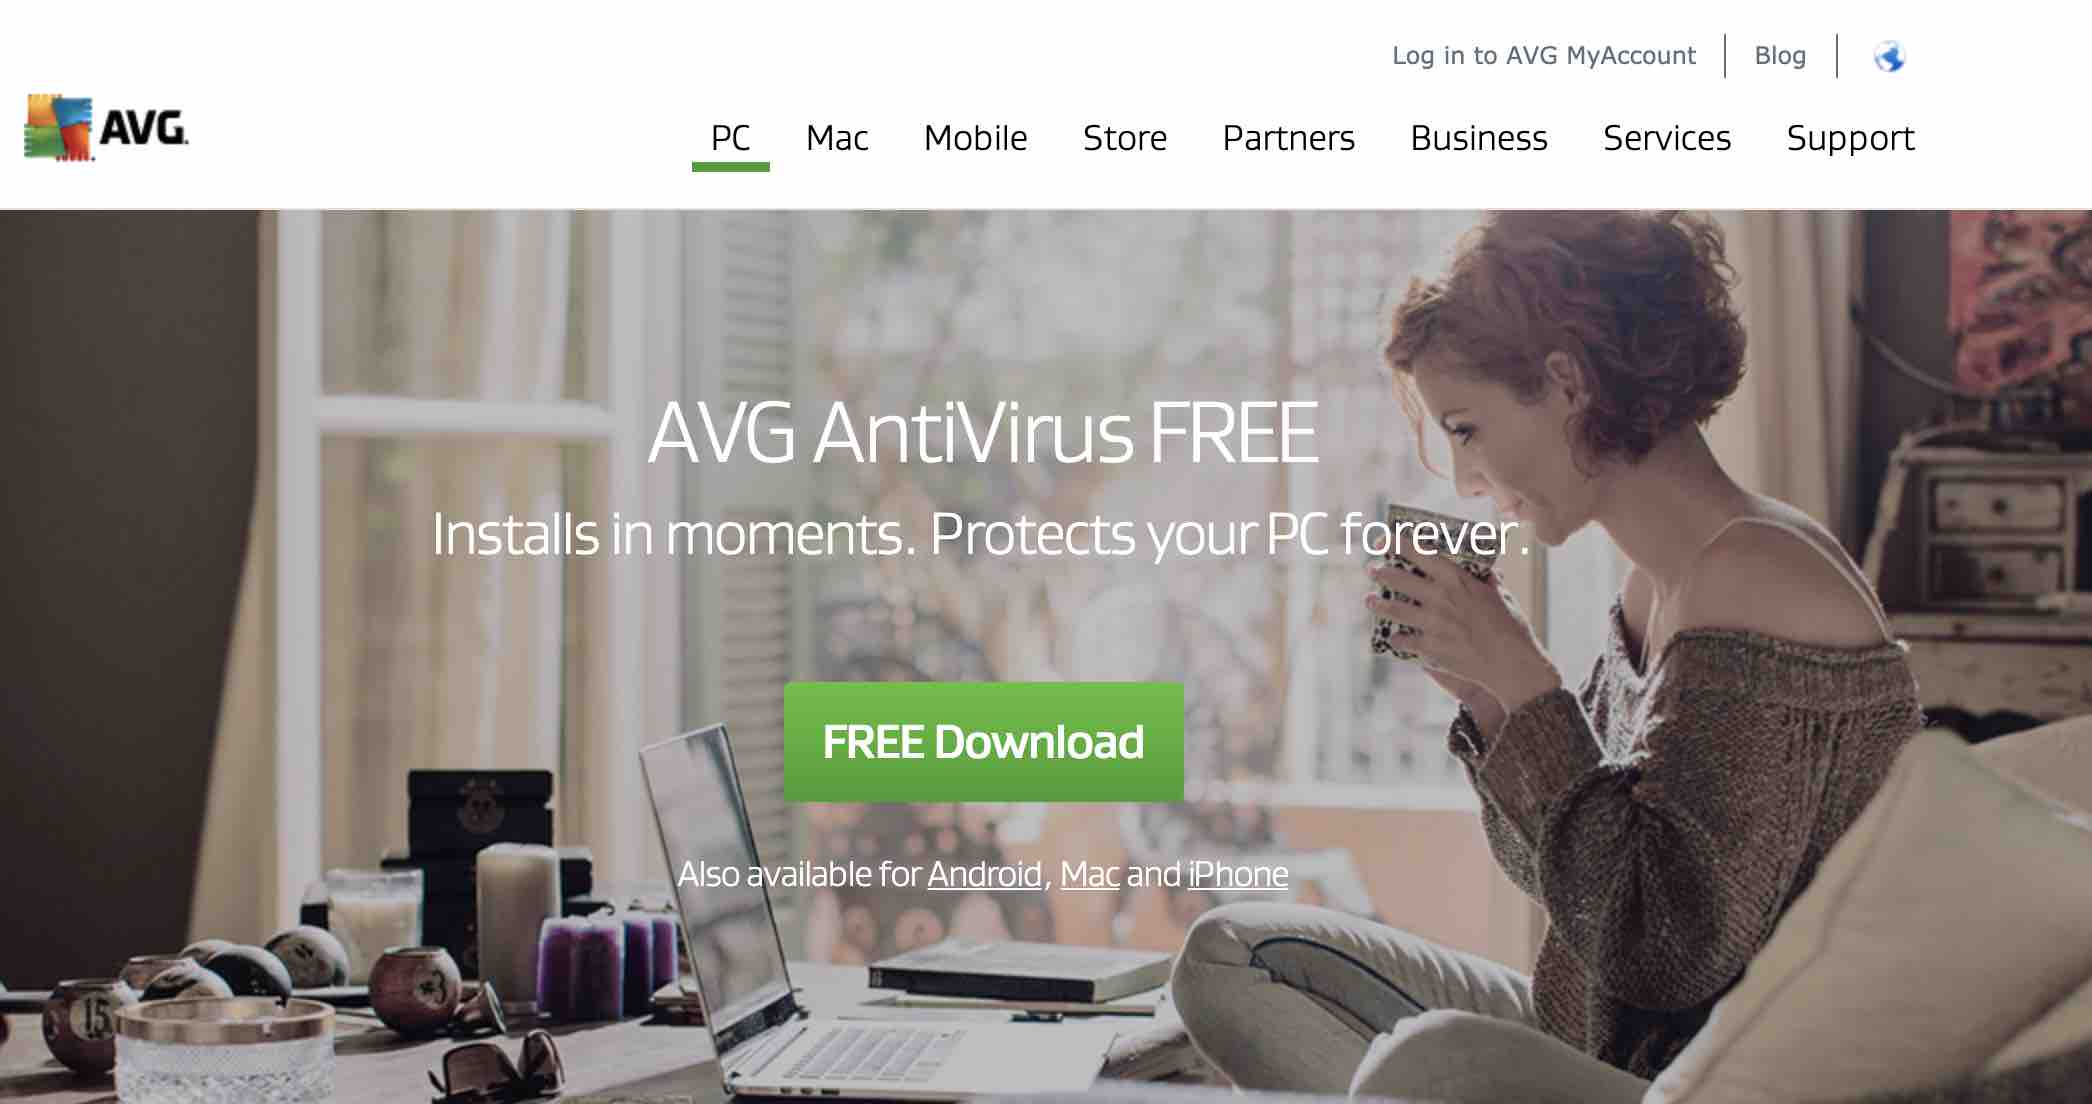 avast | download free antivirus for pc, mac & android